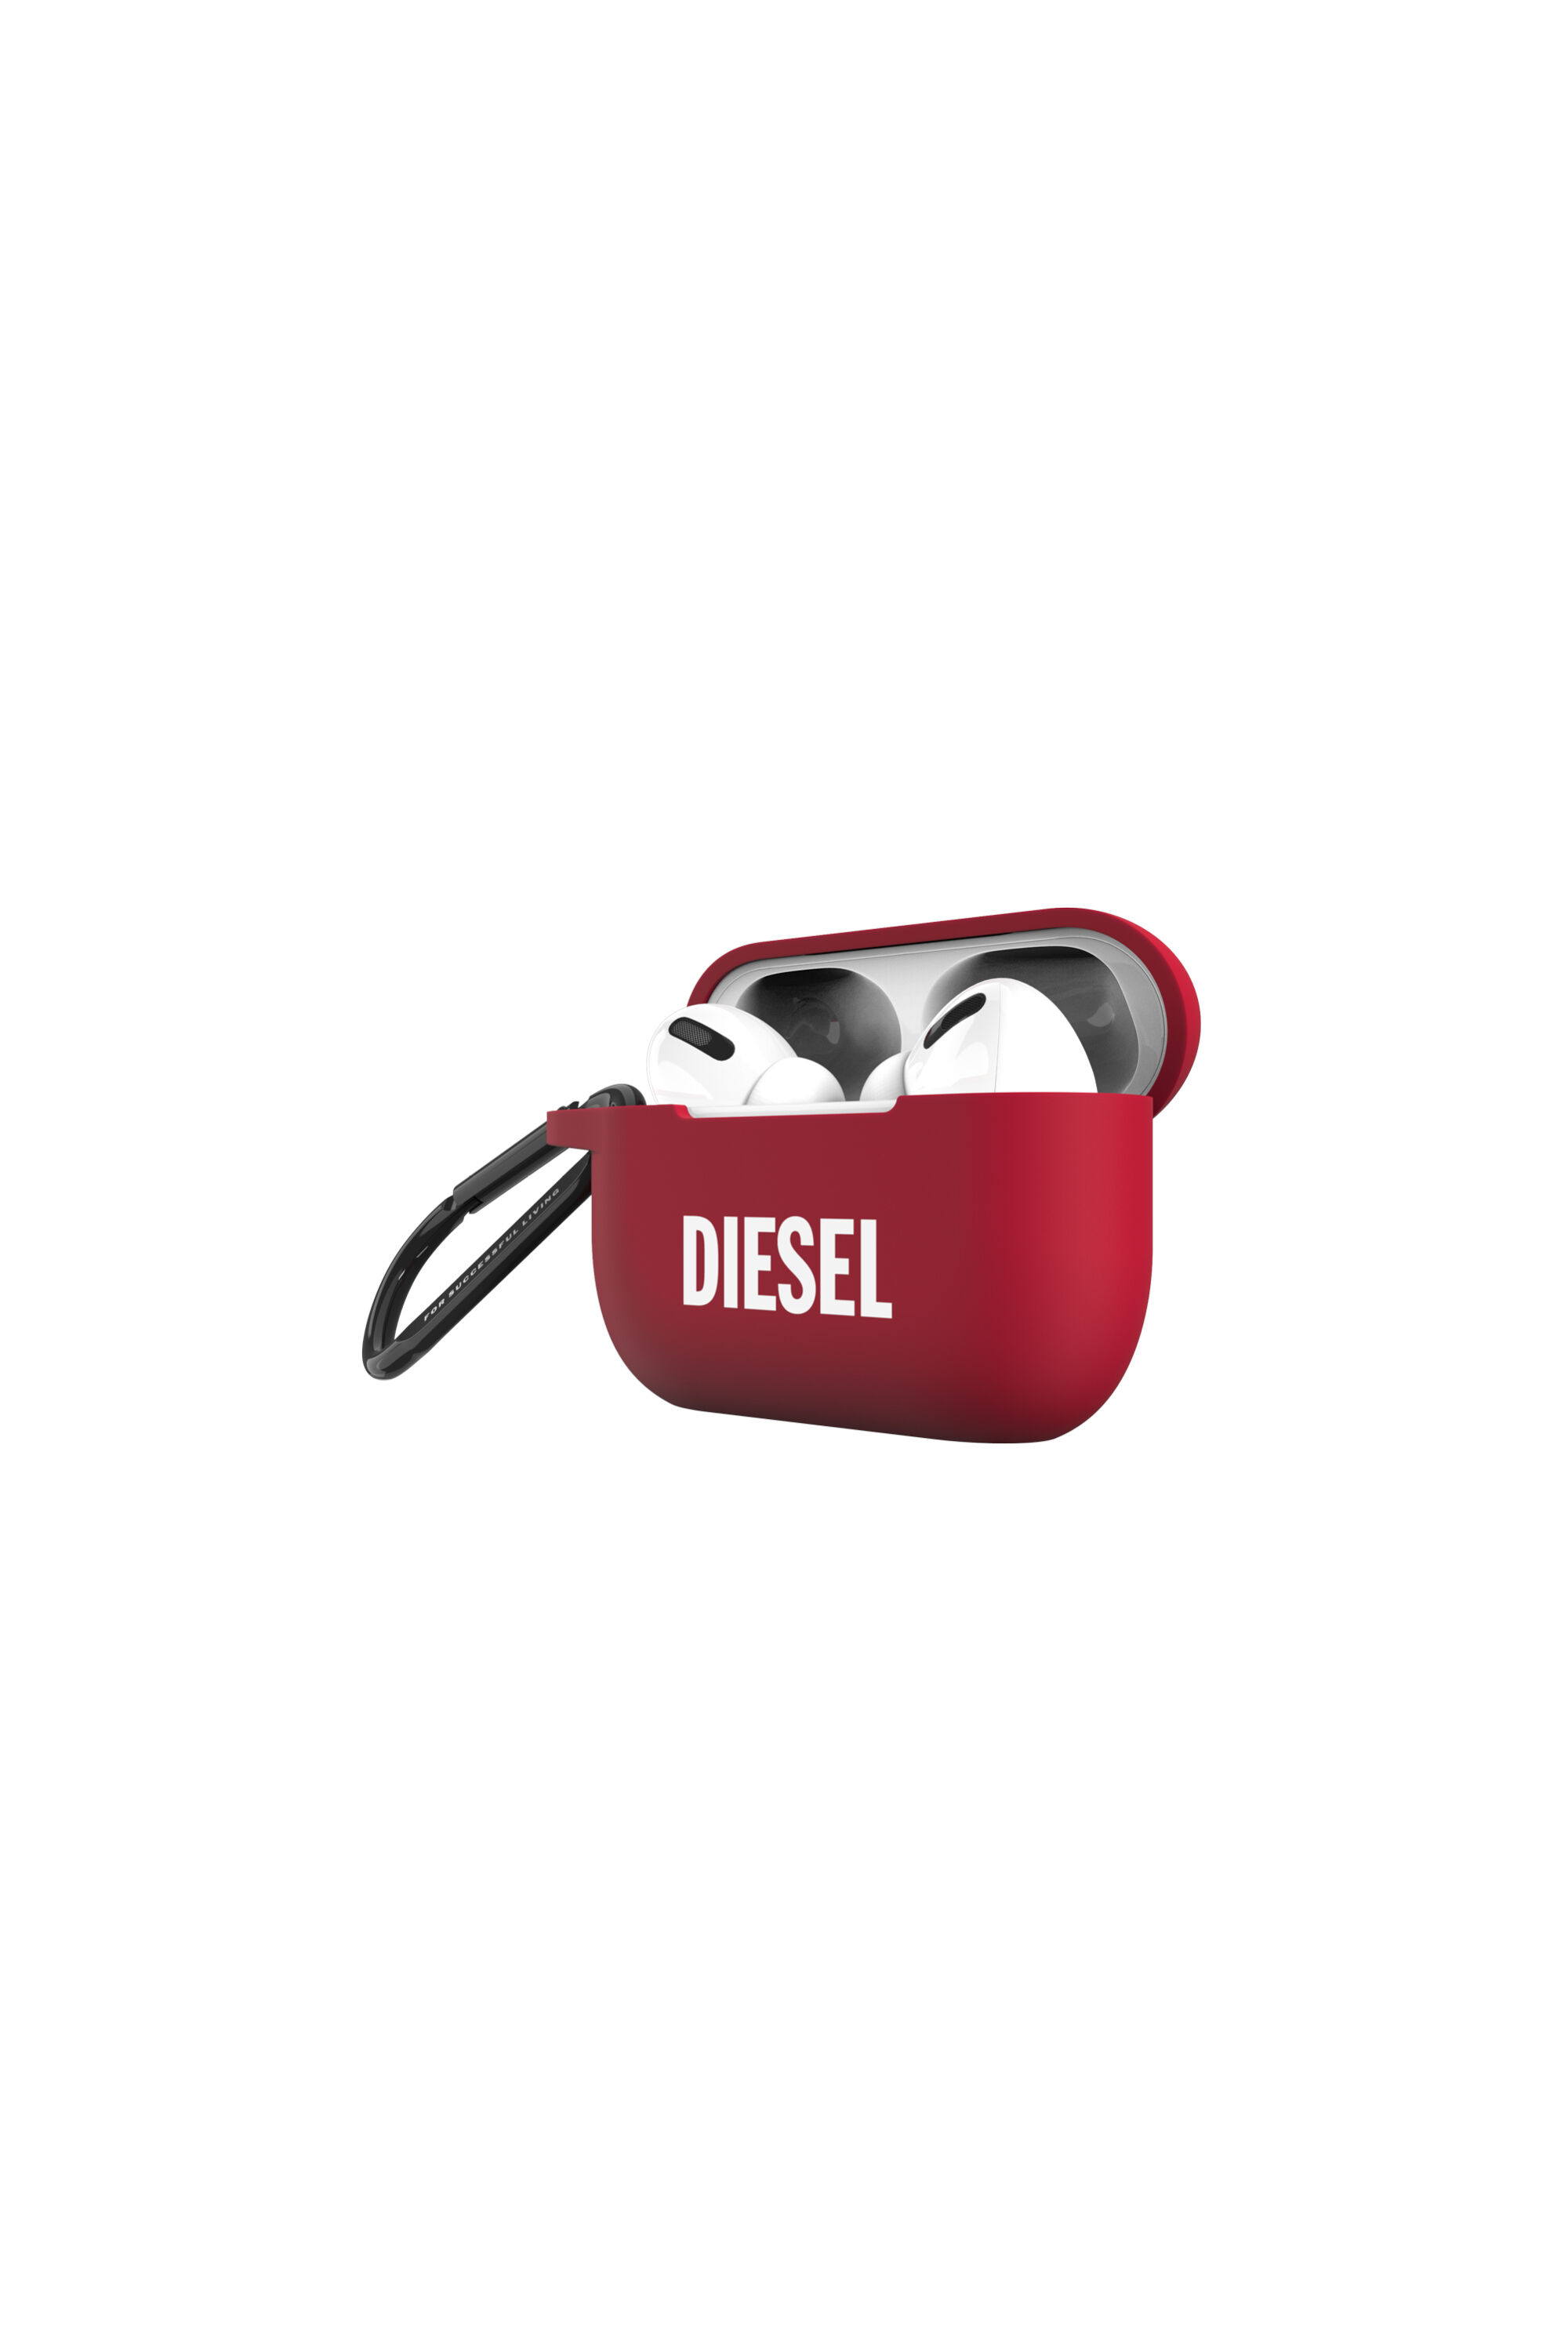 Diesel - 45837 AIRPOD CASE, Unisex Airpod case silicone  for AirPods pro in Red - Image 3